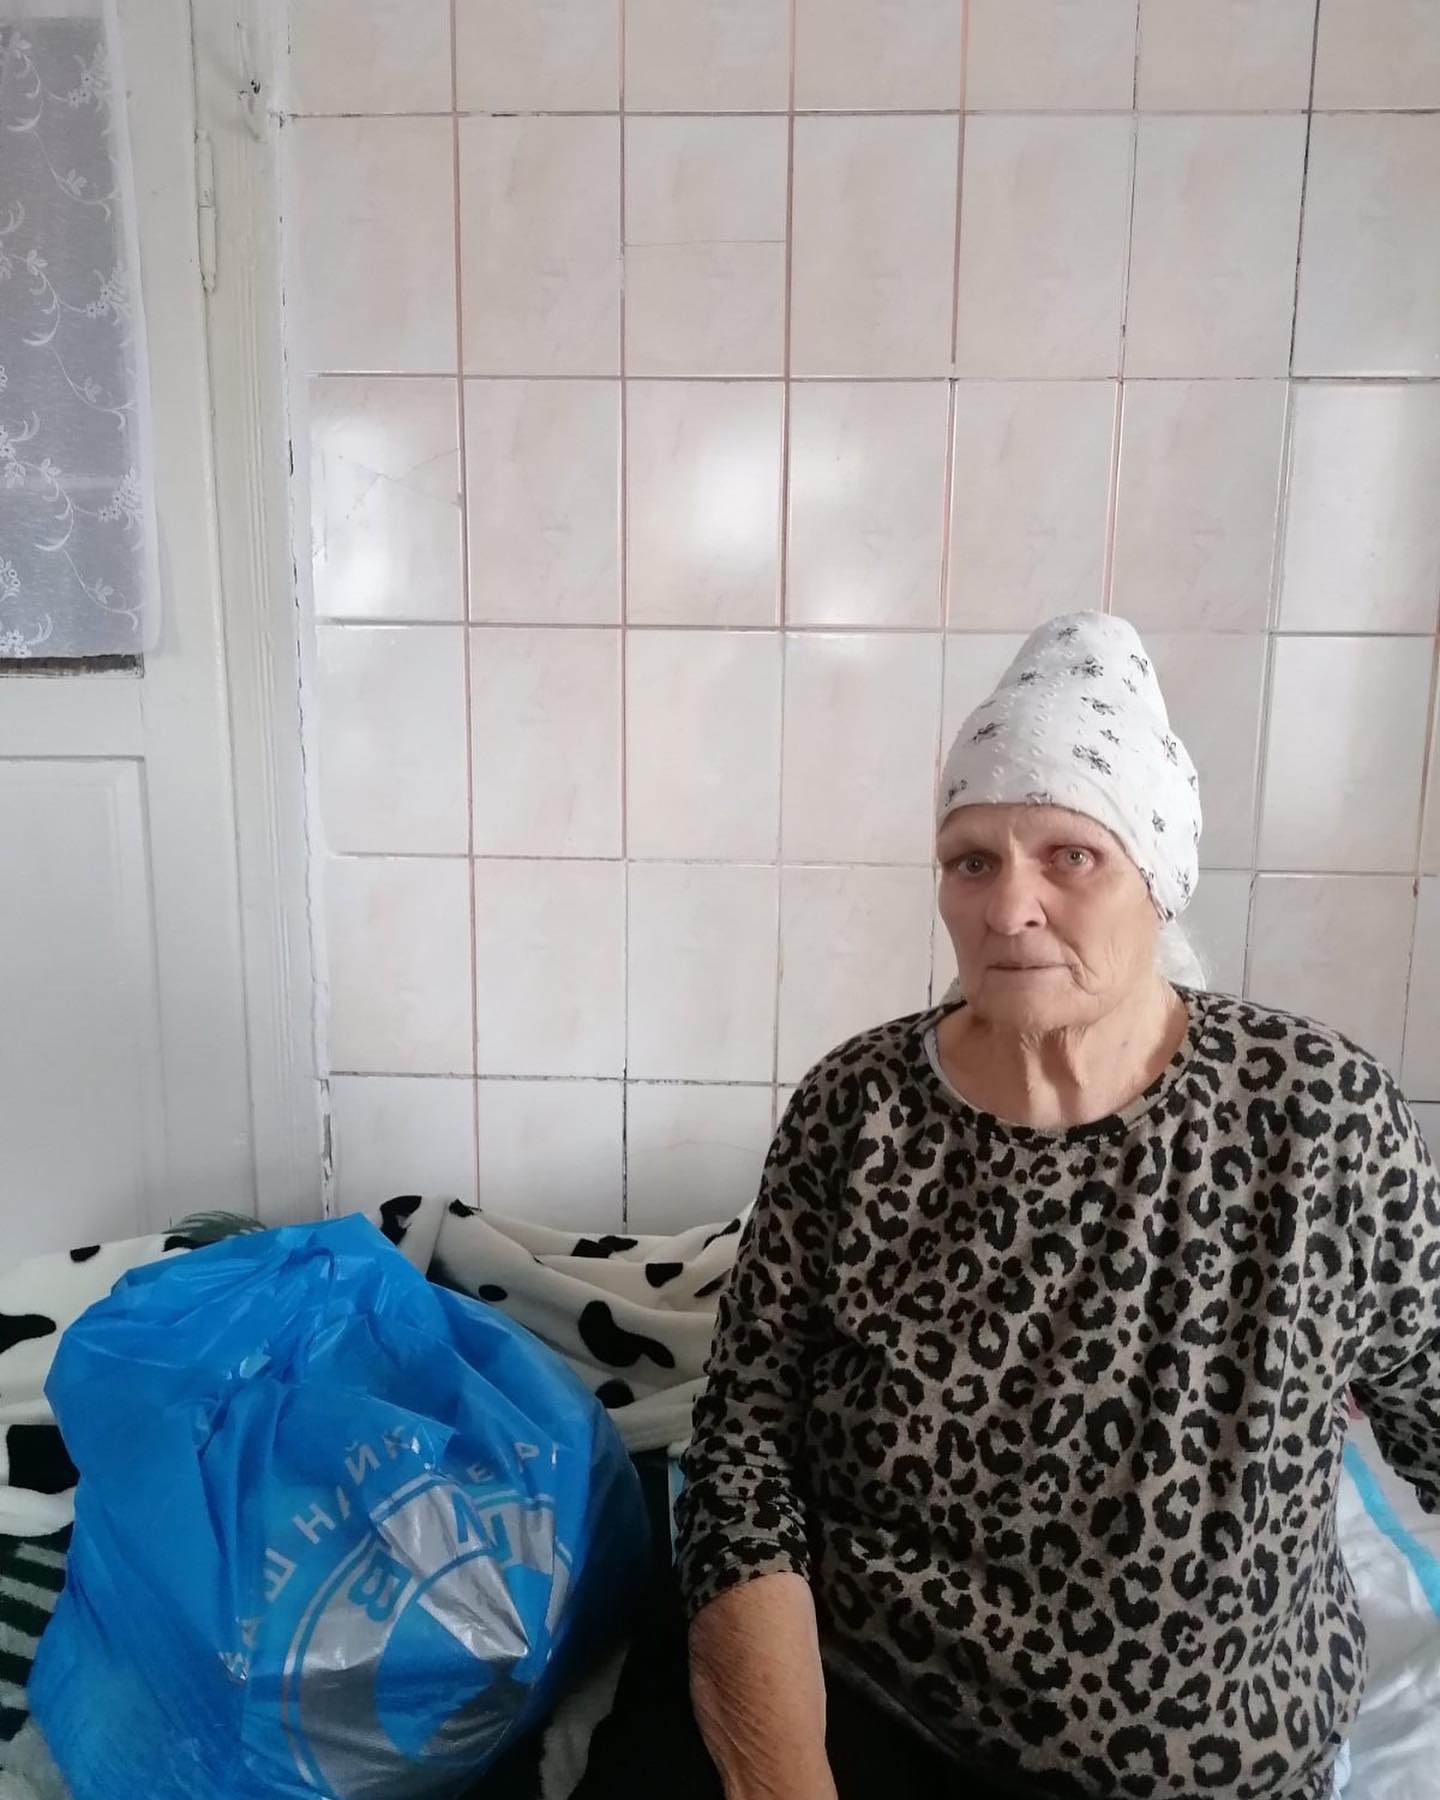 A woman sitting on a bed with a bag on her head.